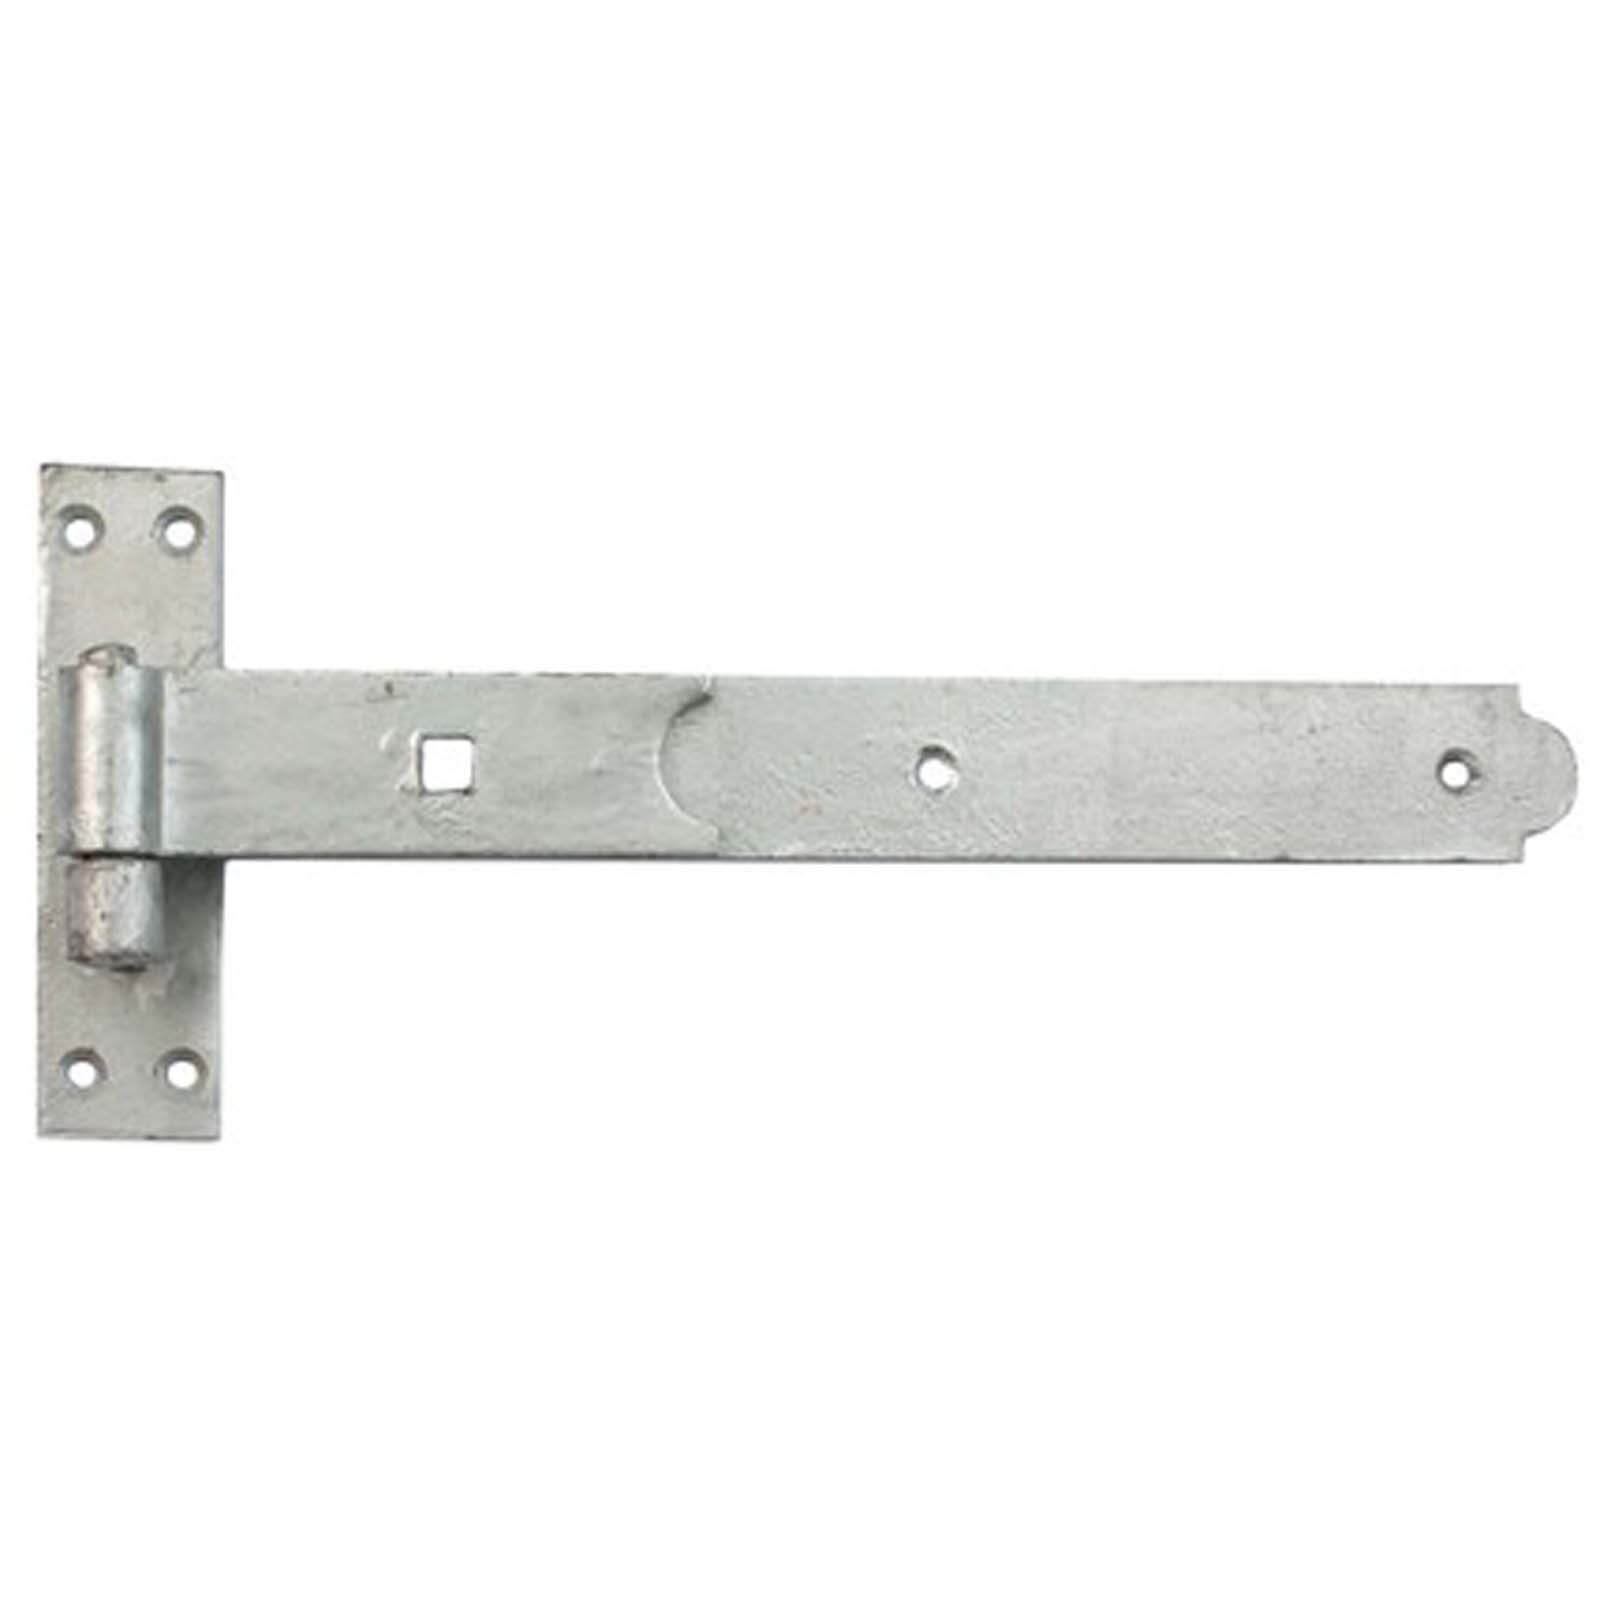 Hook and Band Hinge - Galvanised - 400mm